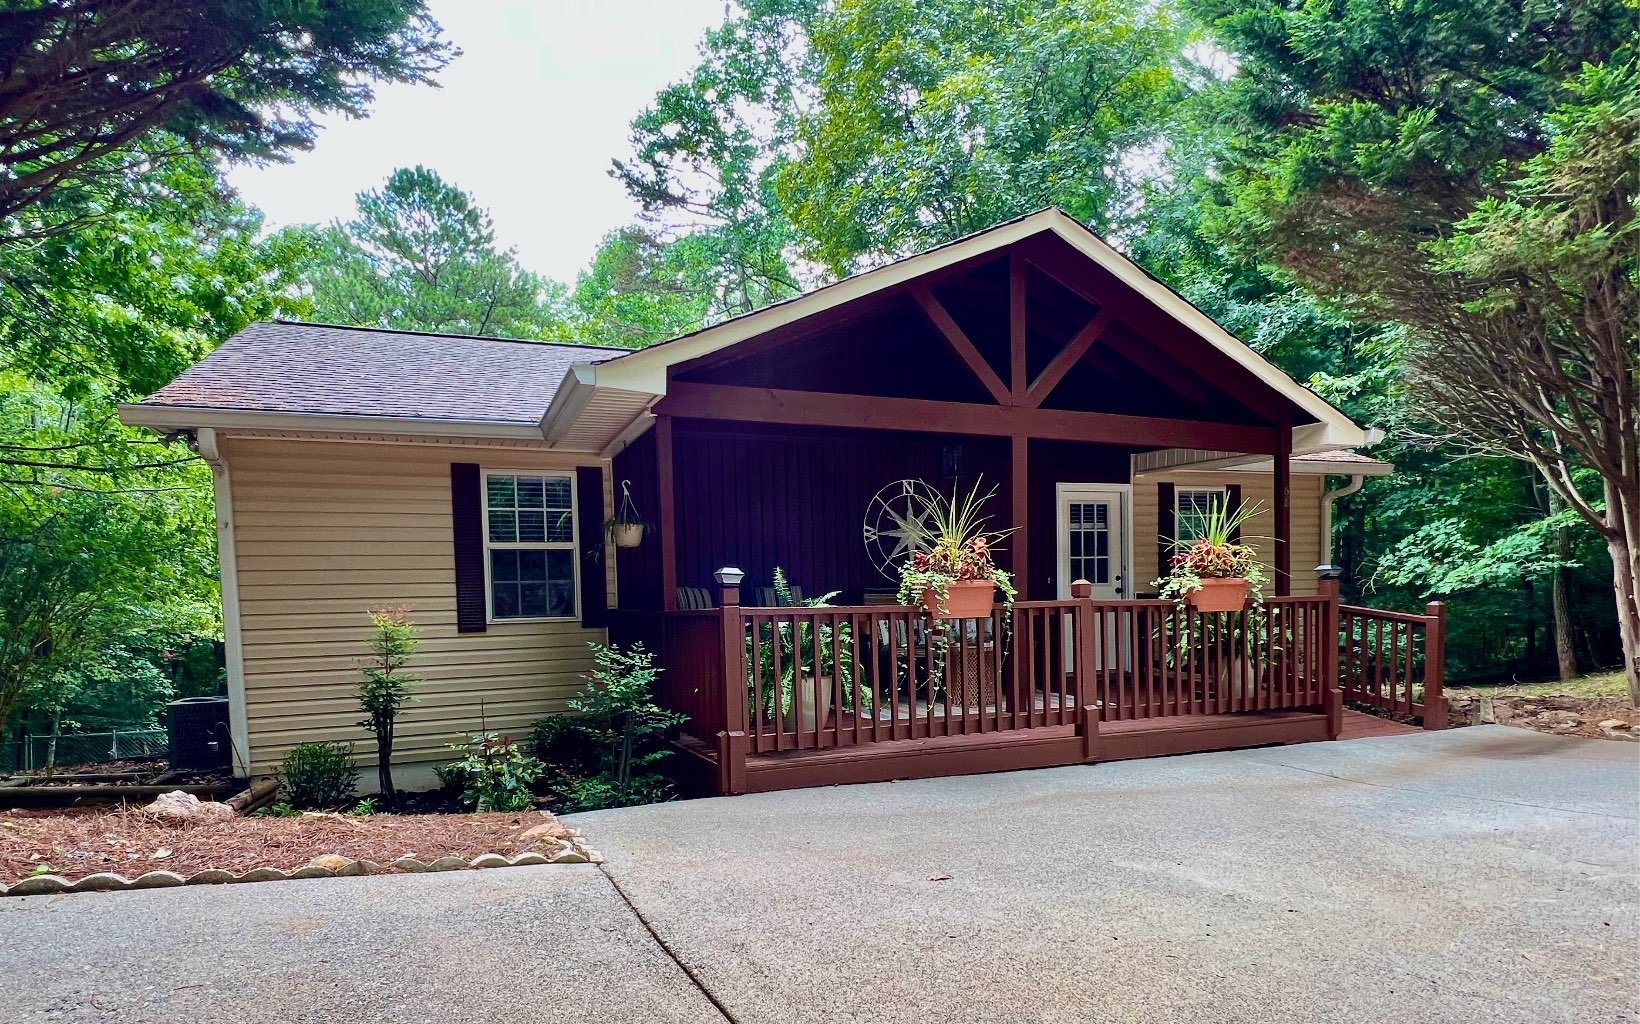 Price improvement!! NEWLY RENOVATED RANCH CABIN only minutes from Downtown Ellijay! This beautifully renovated home has two beds and two full baths on the main with refinished pine floors, new stainless appliances, granite countertops, vaulted ceilings, and a gorgeous corner gas log fireplace. Open concept from kitchen and dining into living space. Ramp entry and everything (including laundry) on main level for easy one-level living. All paved circular drive with a side strip of additional parking. Back deck is perfect for grilling, with an additional screened porch attached. New 3 ton HVAC. The vaulted open and inviting front porch is a great place to relax and enjoy the wildlife in this calm, peaceful resort. A 3rd bedroom with wardrobe and full bath are in the finished basement, with a flex room that could be a 4th bedroom or living area. Walk out on to the patio from the basement, a perfect spot for a hot tub, and you'll find a gorgeous fenced in back yard with fire pit area, storage building, and small creek in the back! Second half of basement would be a perfect game room, workshop, or additional bedrooms. So many possibilities with this adorable rustic retreat! Enjoy all the amenities of Coosawattee, including three pools, rec center with arcade, fitness room, tennis, basketball, pickleball, and more. Hiking trails, stocked pond and river access for fishing and swimming add to the enjoyment for families and renters alike.